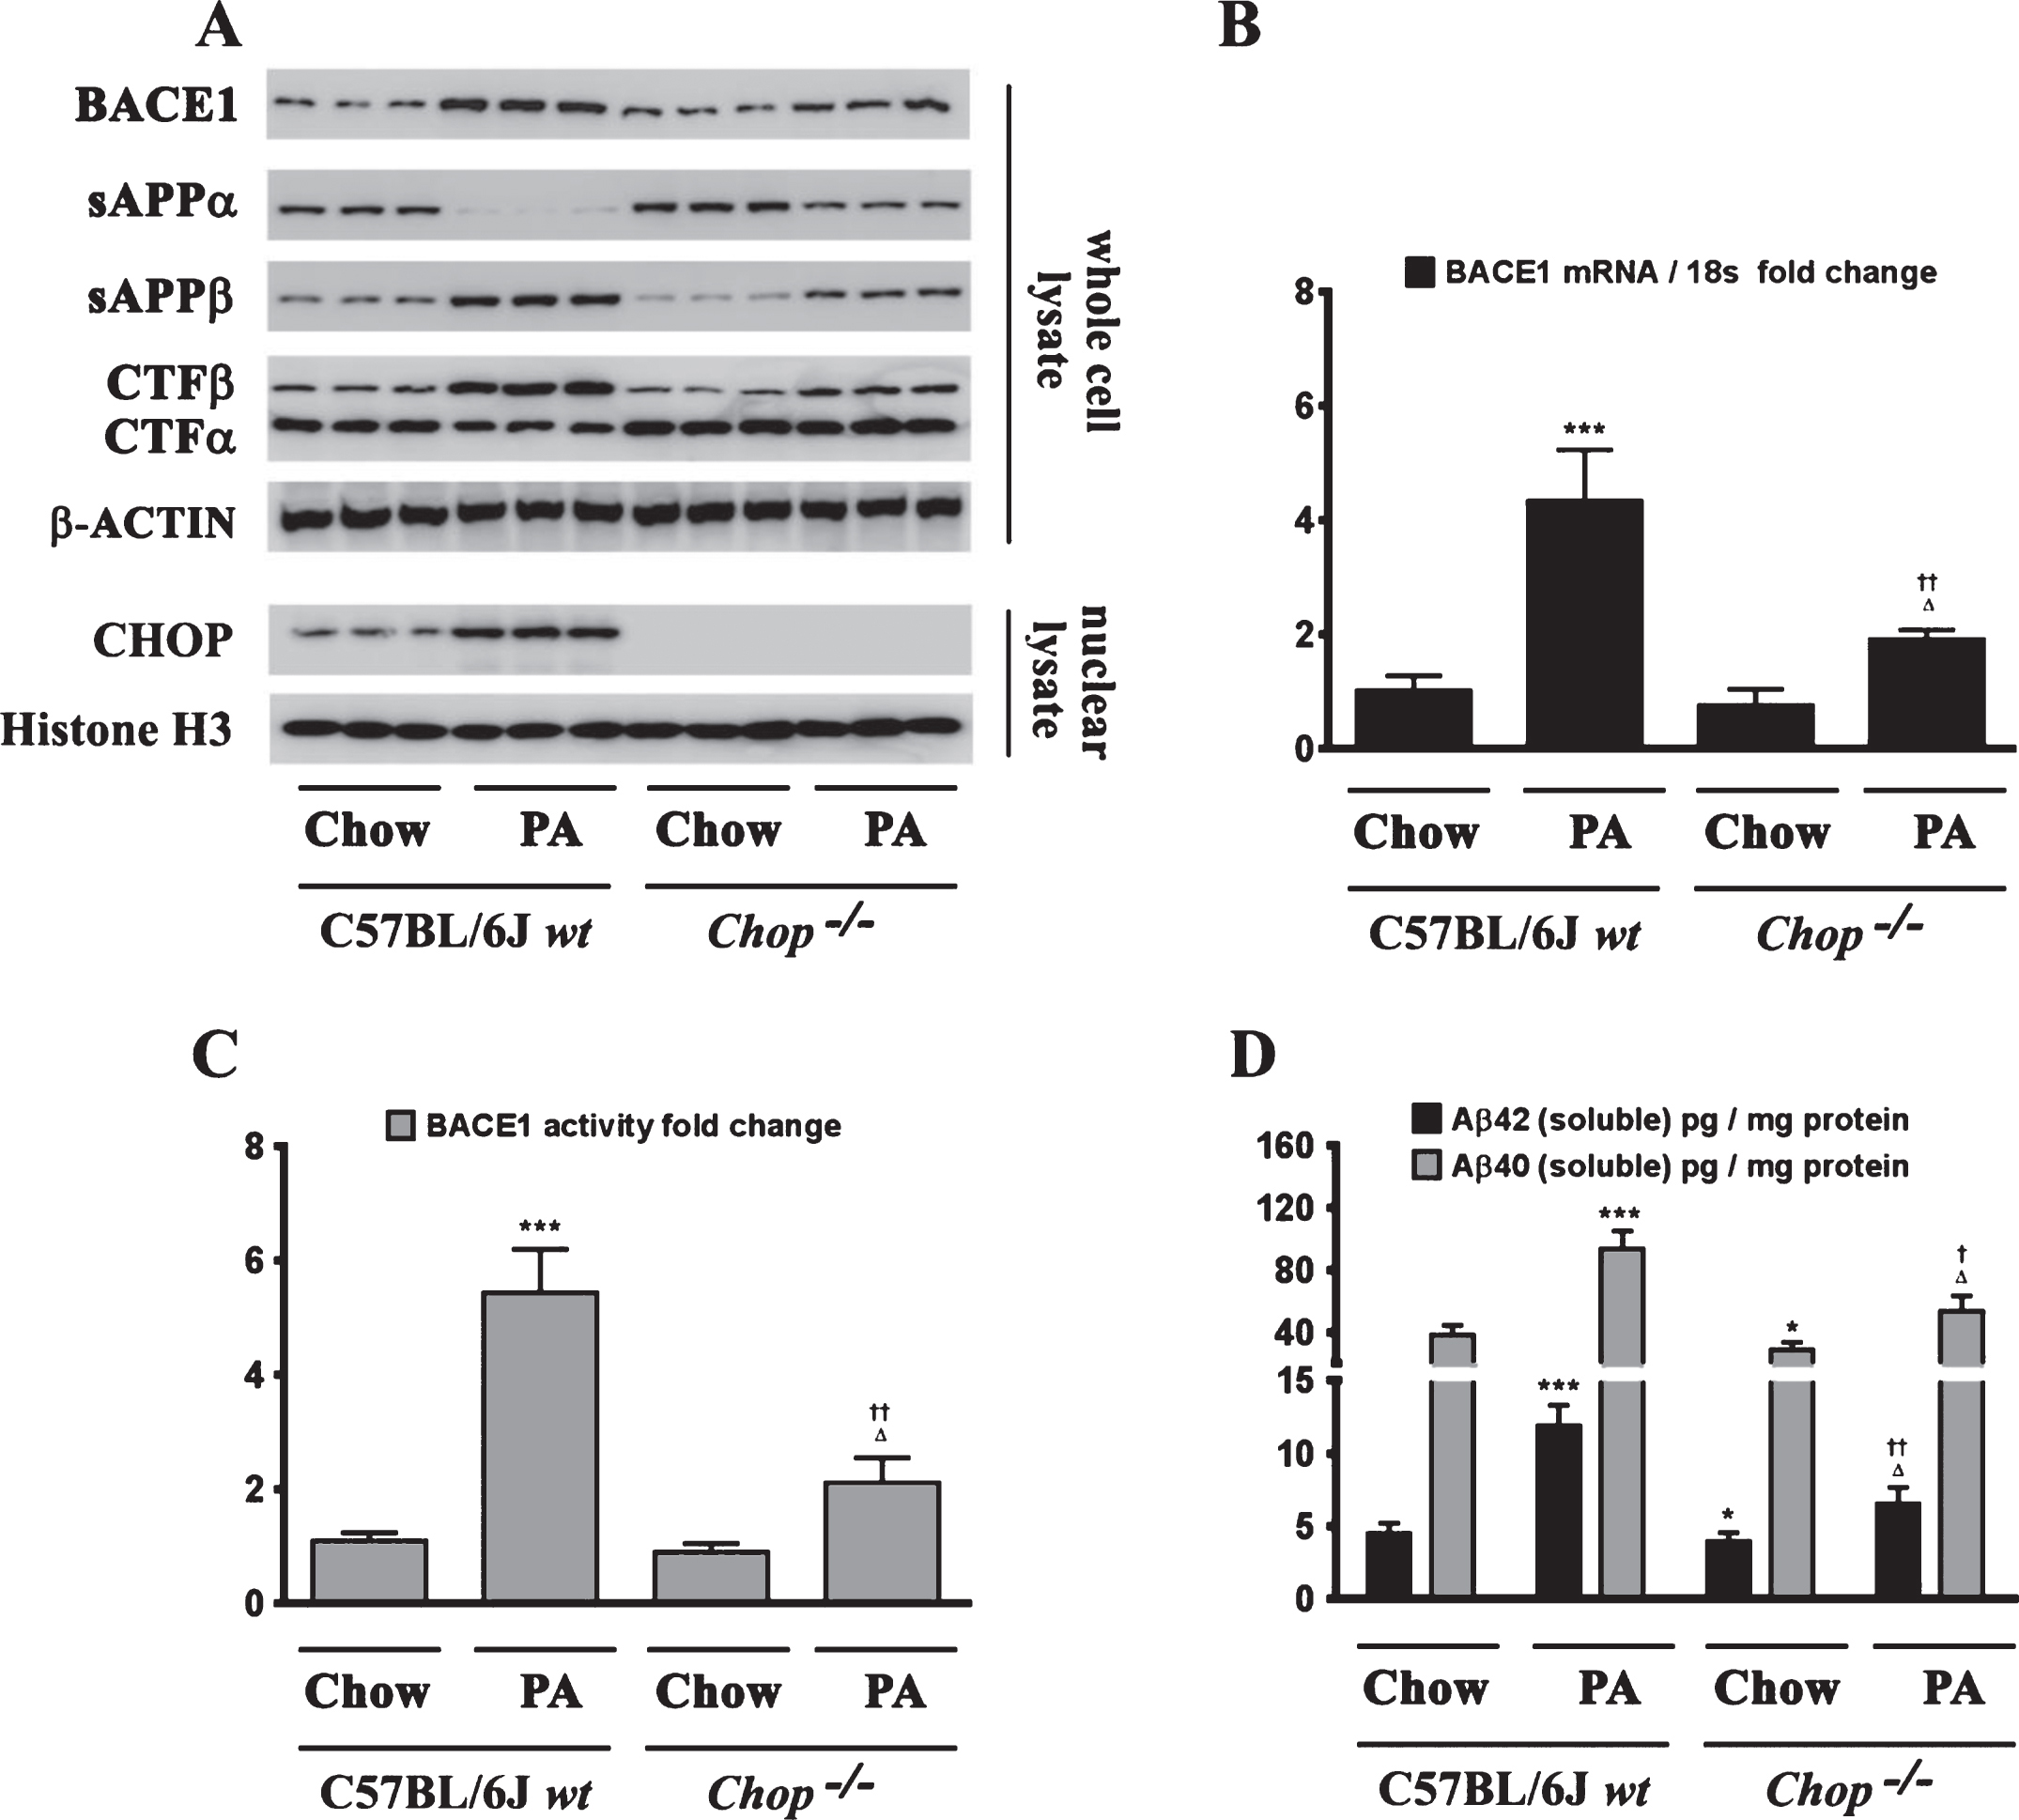 Chop–/– mice are significantly protected from the palmitate-enriched diet-induced increase in BACE1 expression and ensuing Aβ genesis. A) Representative western blots show that nine-month-old Chop–/– mice fed a palmitate-enriched diet for three months, do not exhibit the increase in BACE1 protein levels as well as the accompanying increase in sAβPPβ and CTFβ levels concomitant with a decrease in sAβPPα and CTFα levels, to the same degree in the hippocampal region compared to the C57BL/6J wild-type mice fed a palmitate-enriched diet. B, C) Chop–/– mice fed a palmitate-enriched diet do not exhibit the increase in BACE1 mRNA expression (B) and BACE1 activity (C), to the same degree in the hippocampal region compared to the C57BL/6J wild-type mice fed a palmitate-enriched diet. D) ELISA immunoassays show that the Chop–/– mice fed a palmitate-enriched diet have significantly lower levels of total formic acid-soluble Aβ1 - 40 and Aβ1 - 42 species in the hippocampus, compared to the C57BL/6J wild-type mice fed a palmitate-enriched diet. Data is expressed as Mean±S.D and includes determination made in six (n = 6) different animals from each group. *p < 0.05, ***p < 0.001 versus C57BL/6J wild-type mice fed a control chow diet; †p < 0.05, ††p < 0.01, versus C57BL/6J wild-type mice fed a palmitate-enriched diet; Δp < 0.05 versus Chop–/– mice fed a control chow diet. PA, palmitic acid.